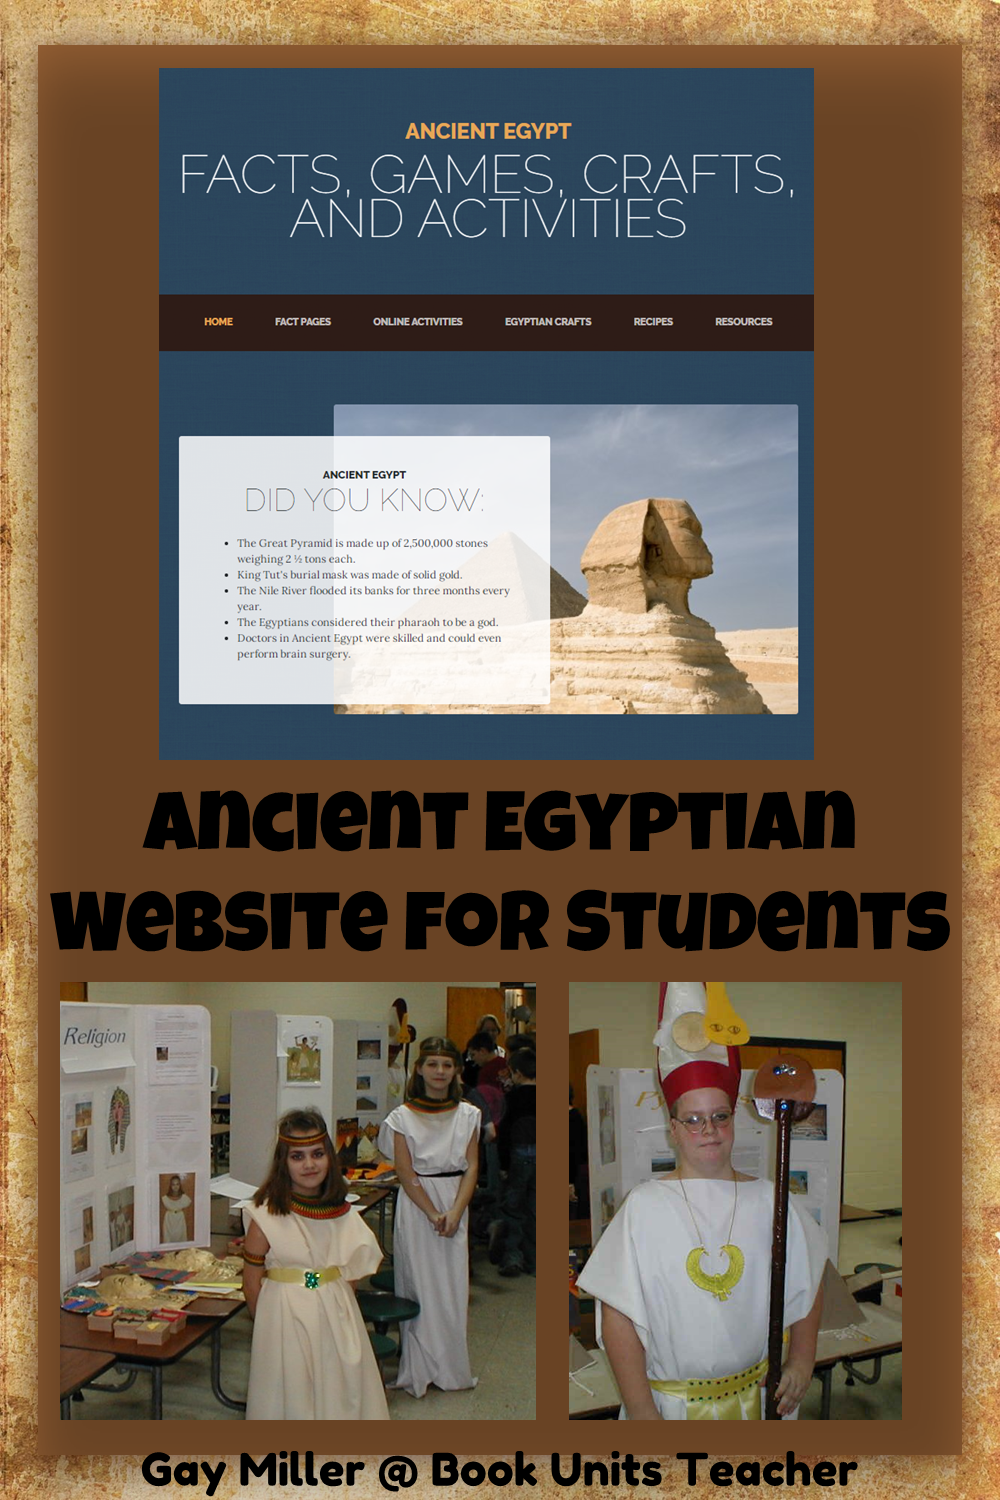 Great Website for Upper Elementary and Middle School Students about Ancient Egypt